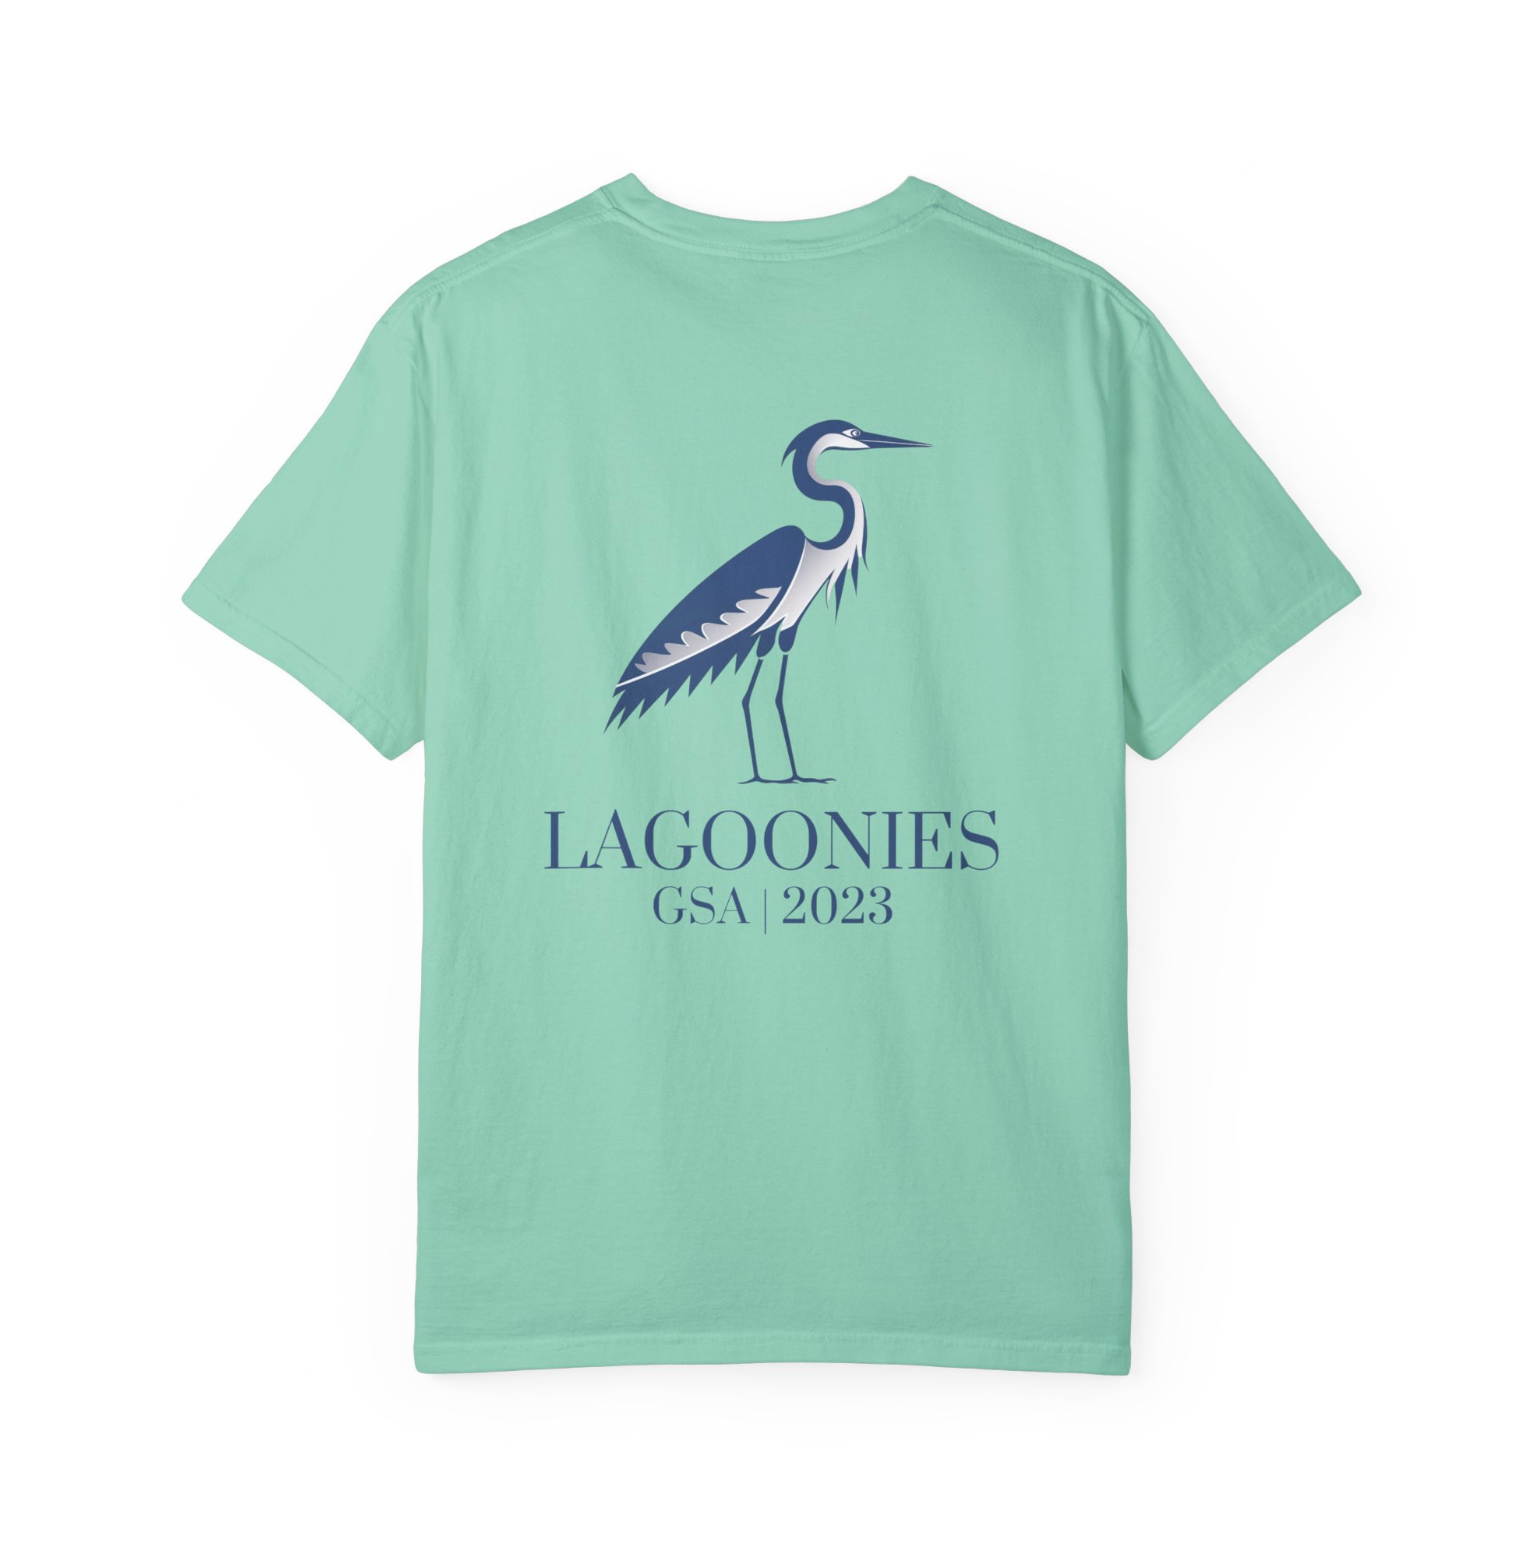 A mint green Comfort Colors t-shirt with the Lagoonies logo and the text “GSA | 2023” printed on the front. The t-shirt is part of the Limited Launch Edition.